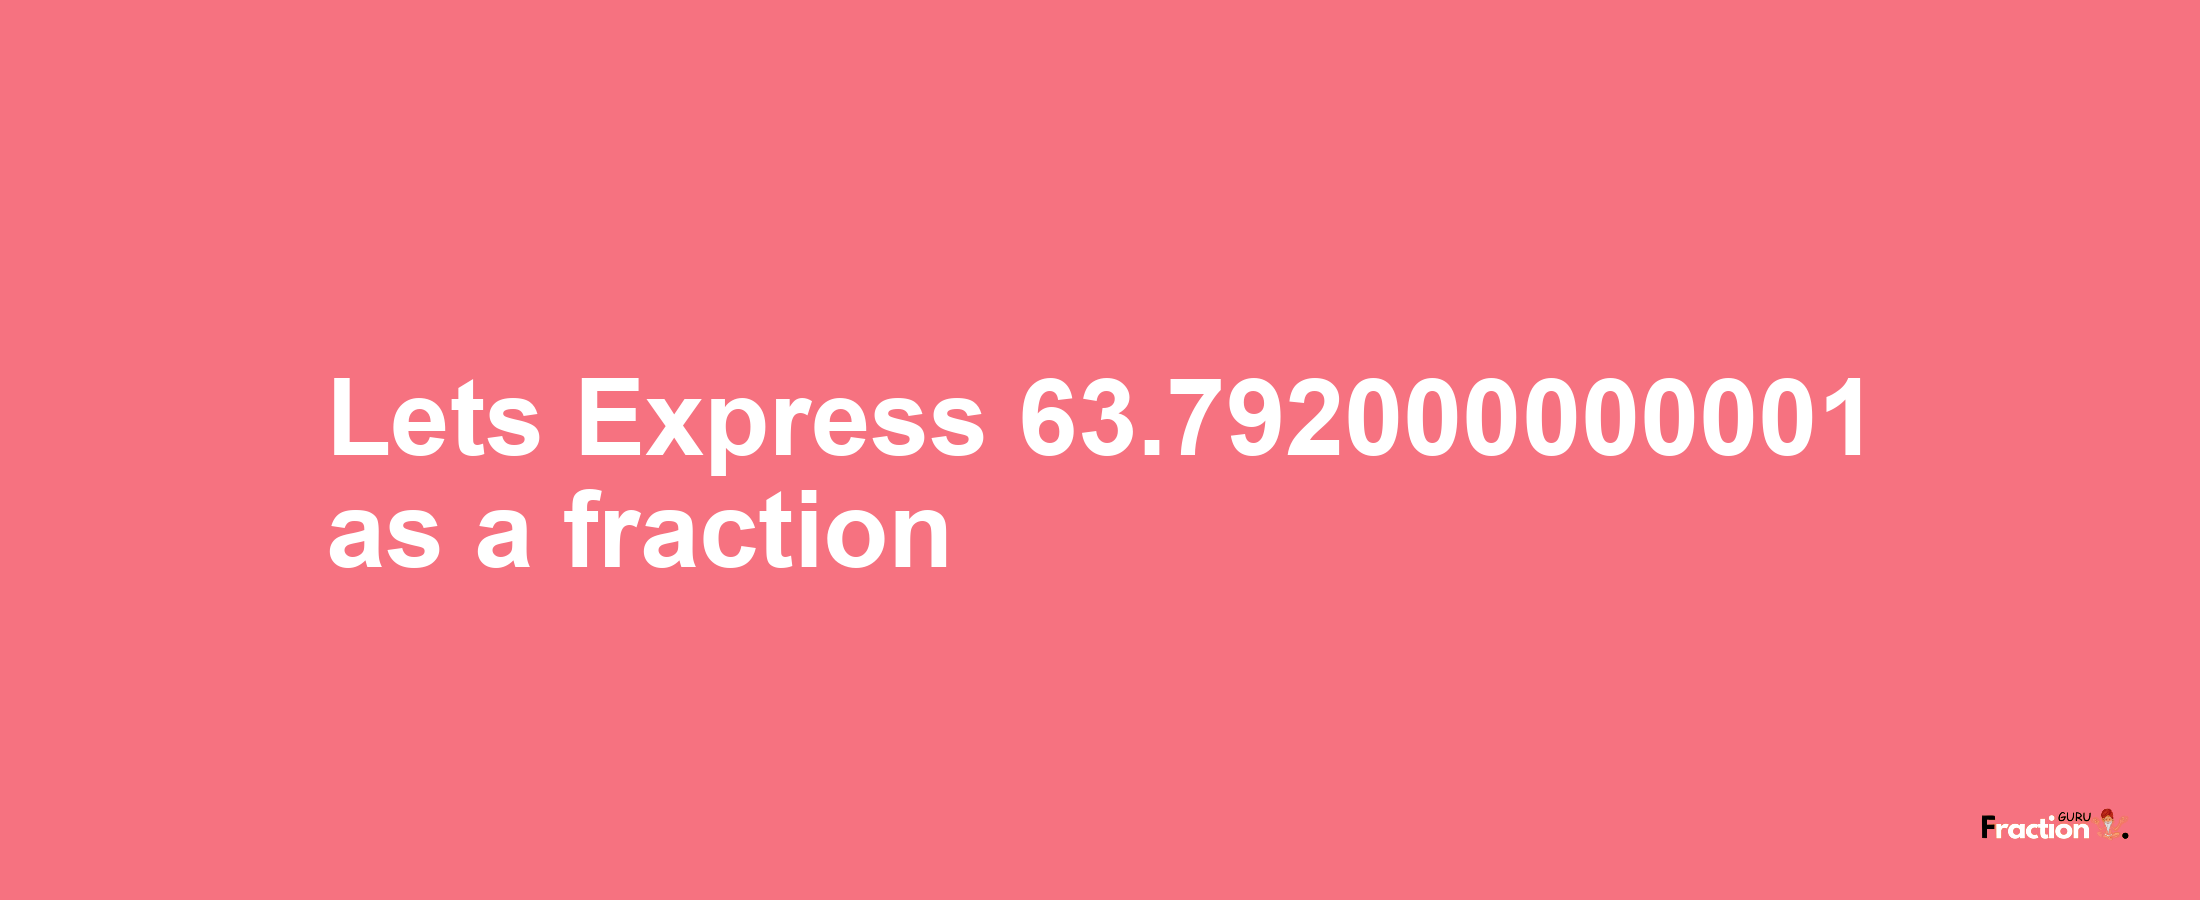 Lets Express 63.792000000001 as afraction